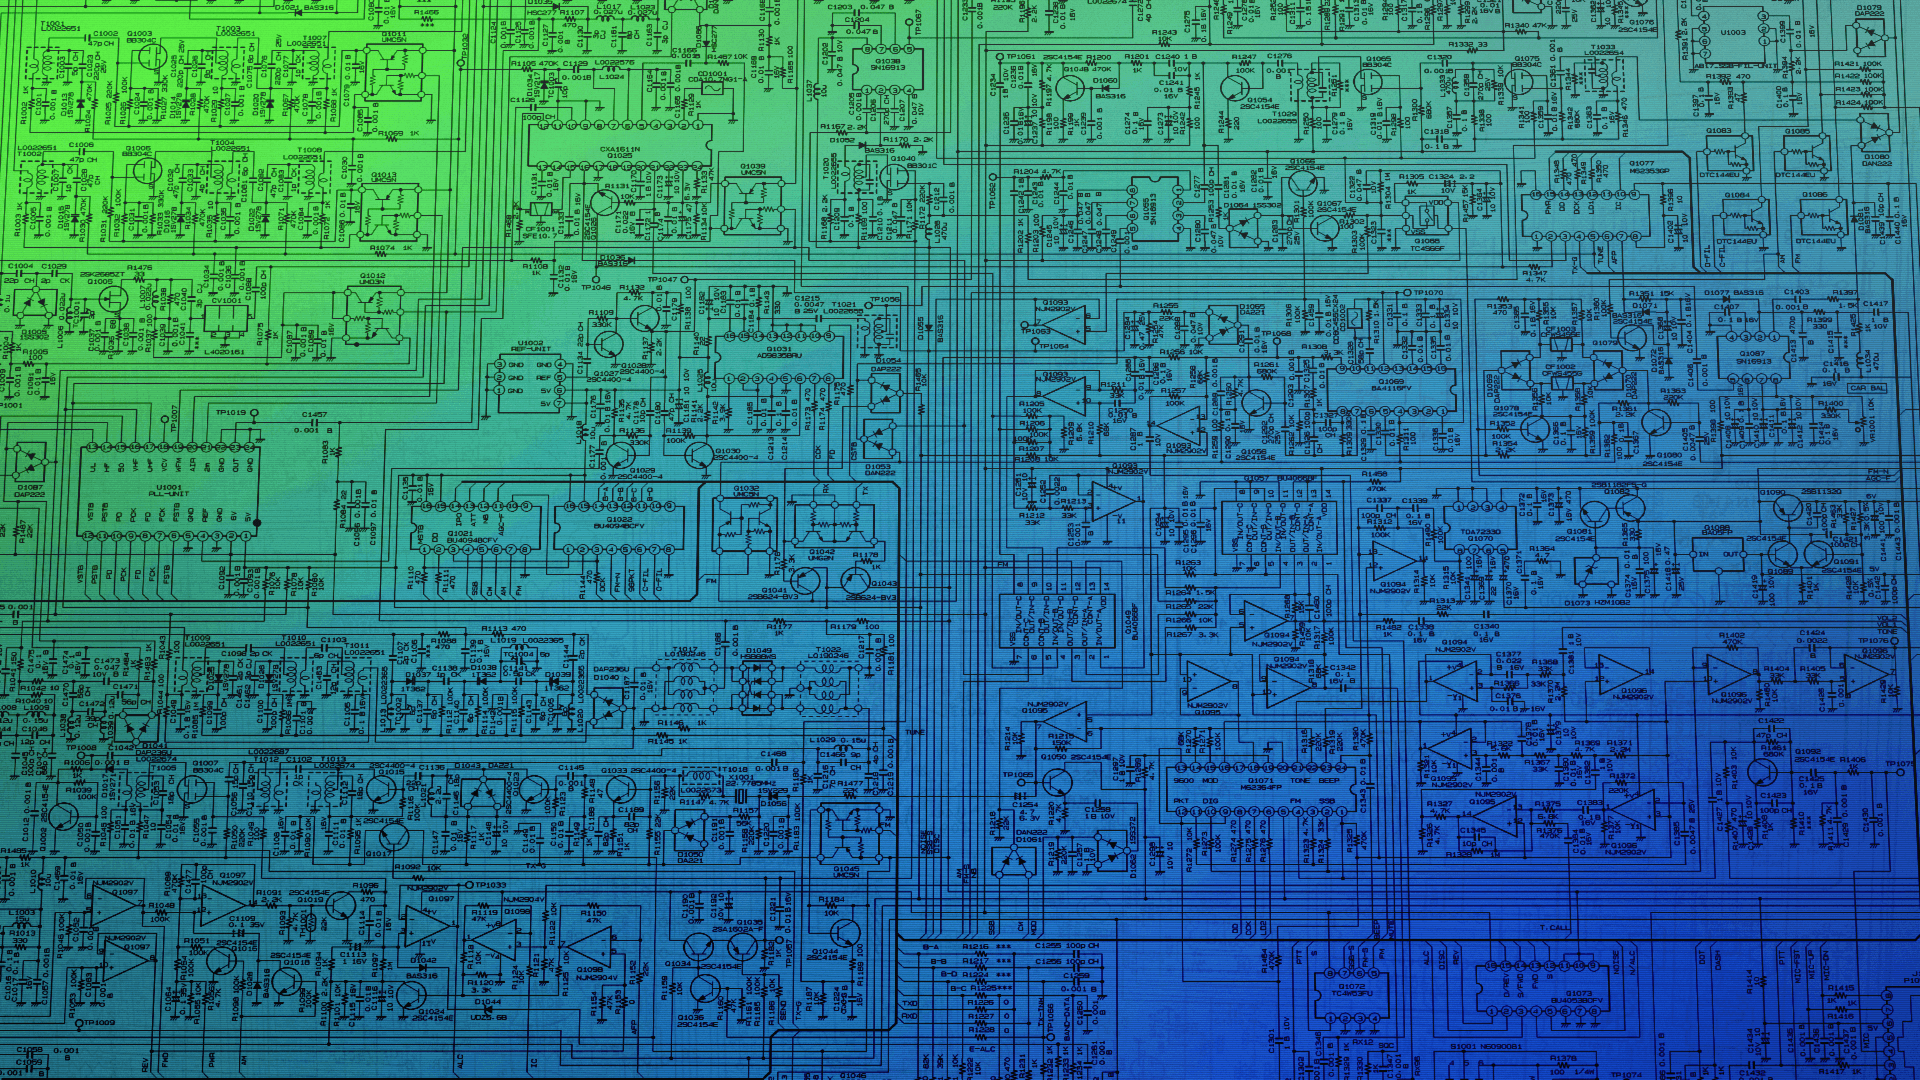 General 1920x1080 map CPU chips circuits schematic electronics blue